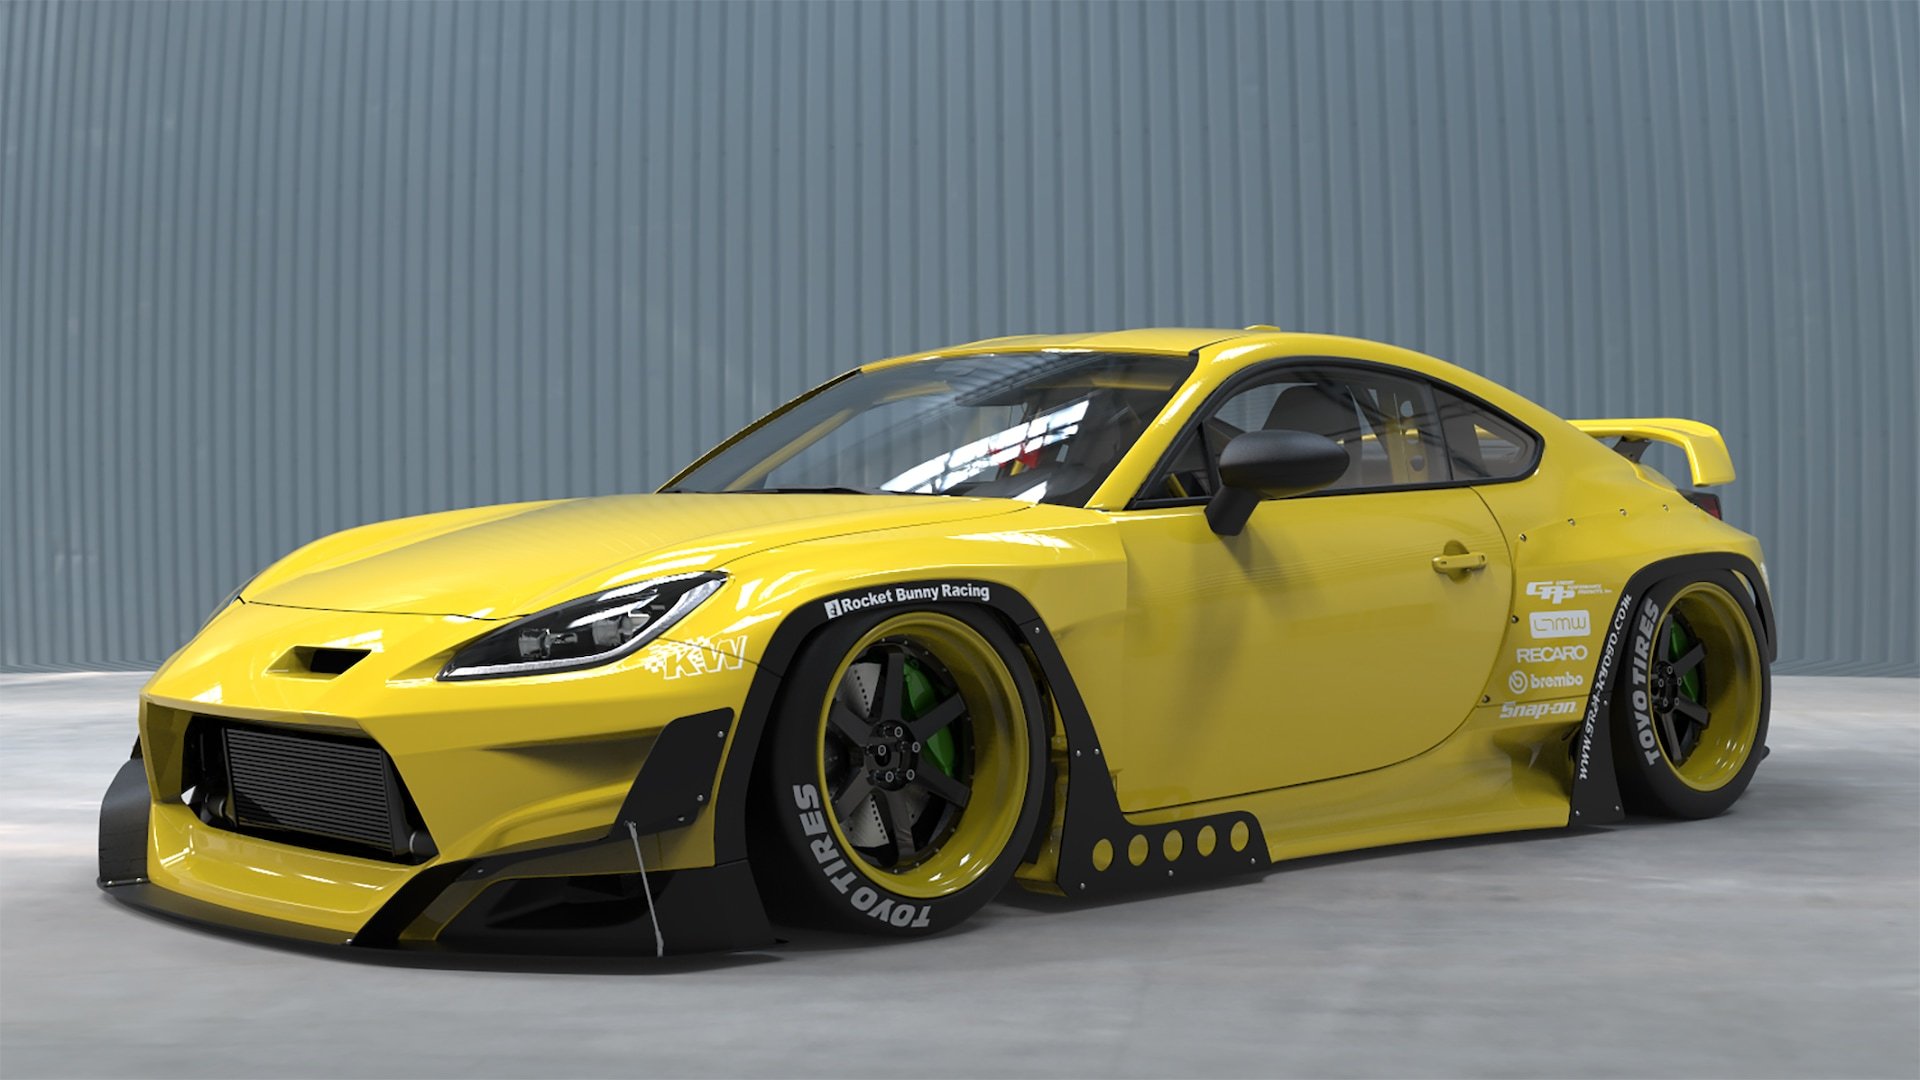 The Toyota GR 86 Gets a Rocket Bunny Makeover